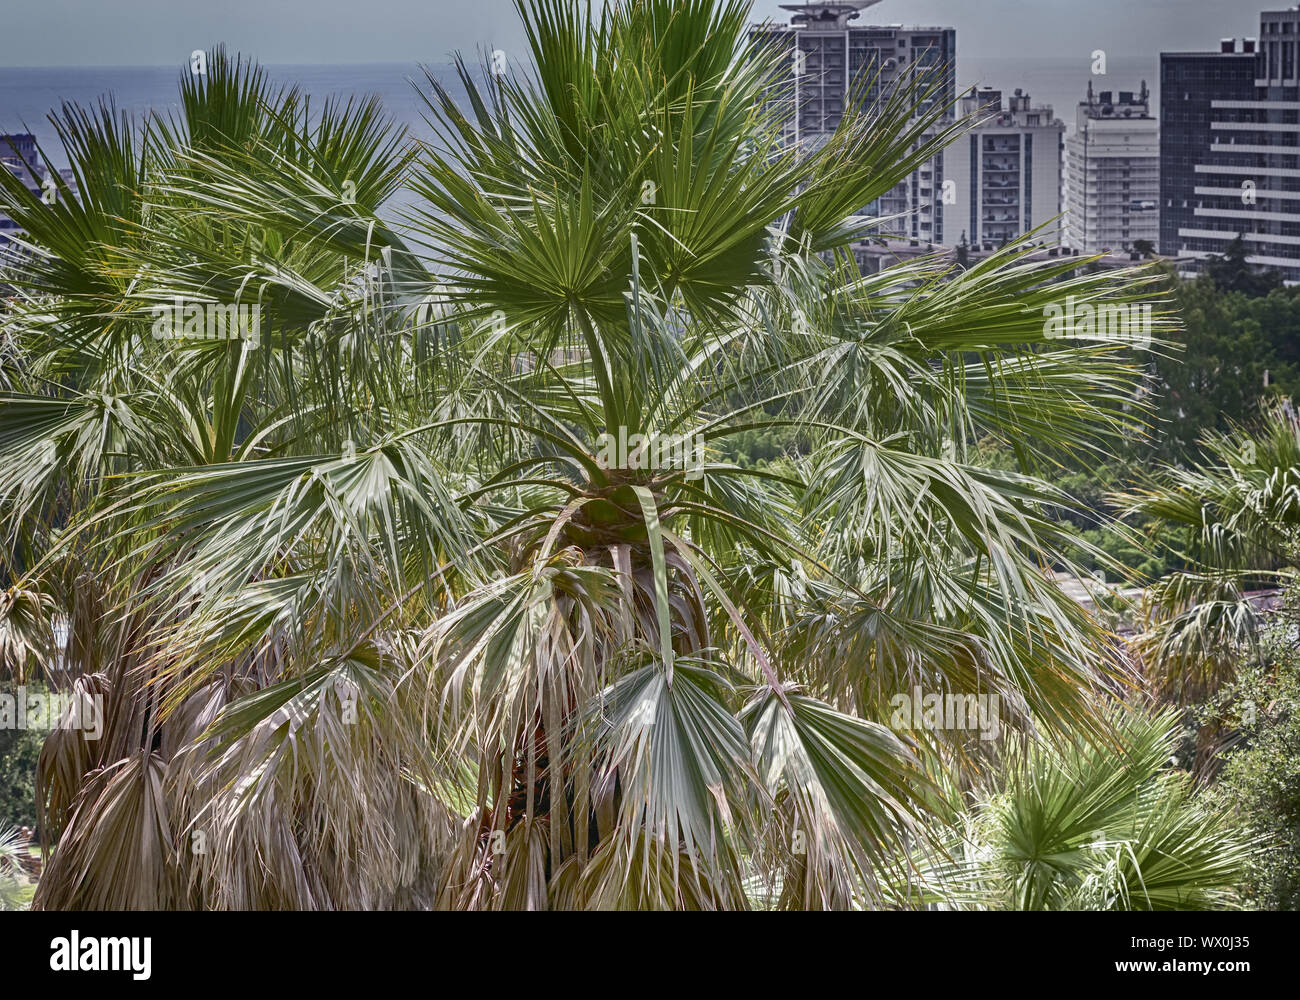 Palm trees in the arboretum on a hillside. Stock Photo